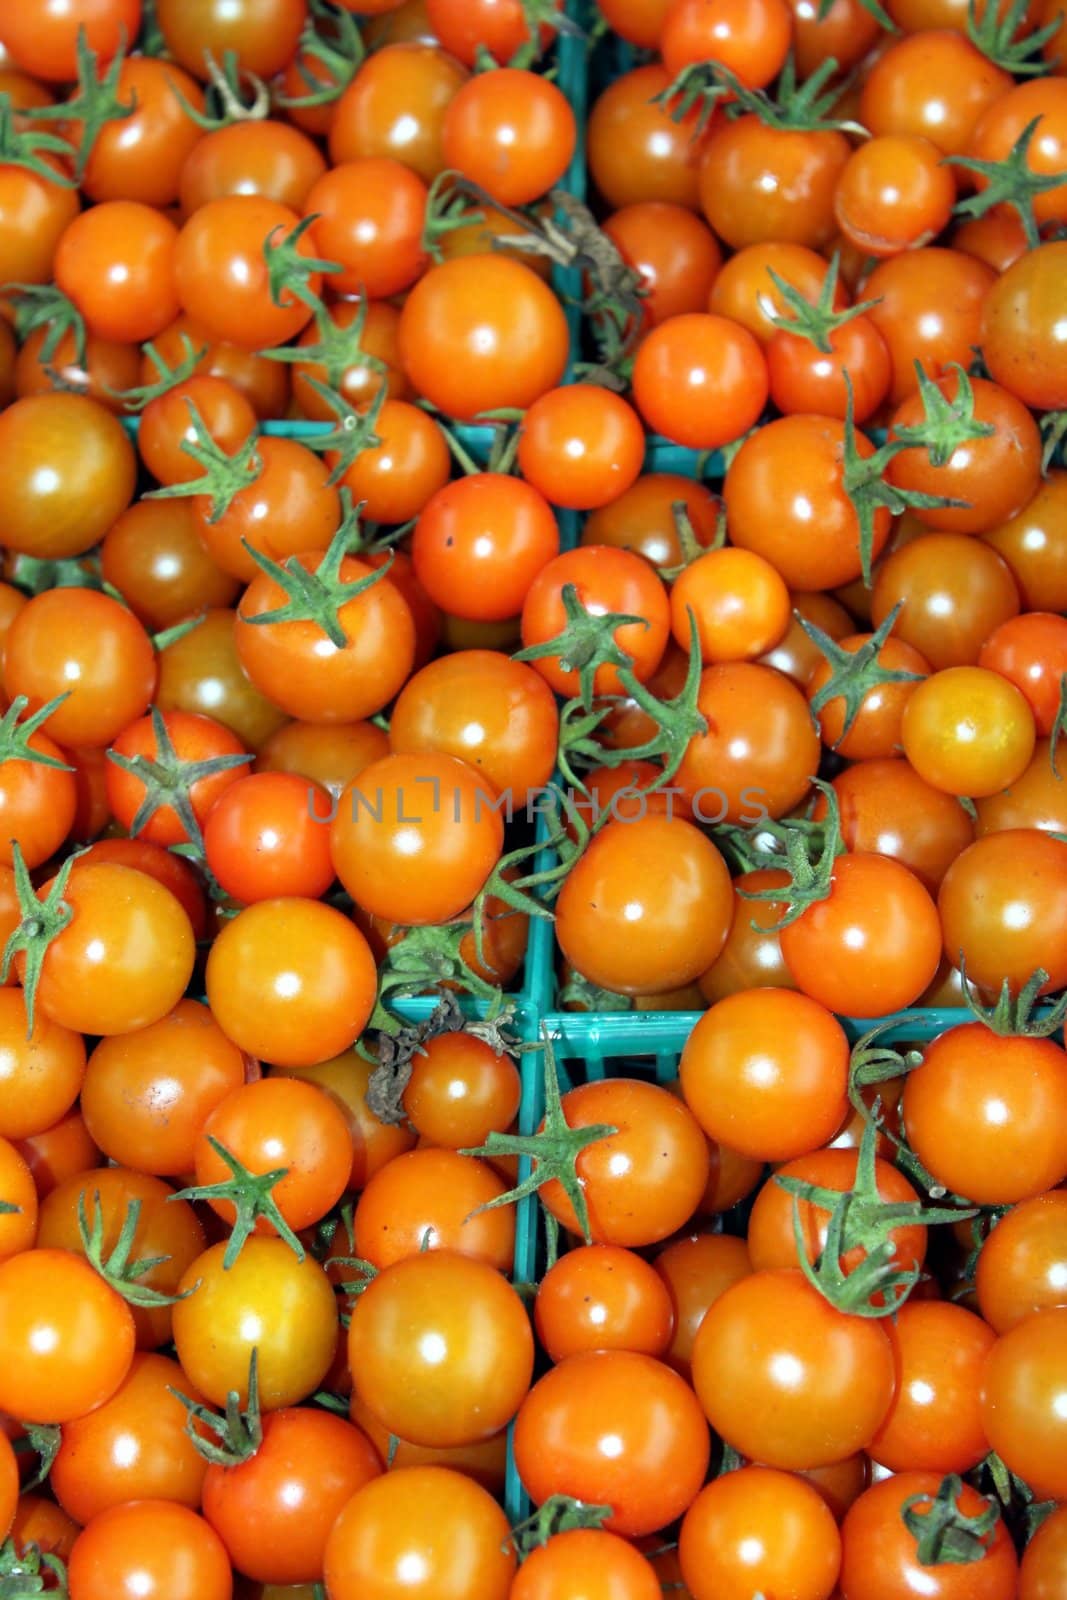 Orange cherry tomatoes at a farmers market in baskets